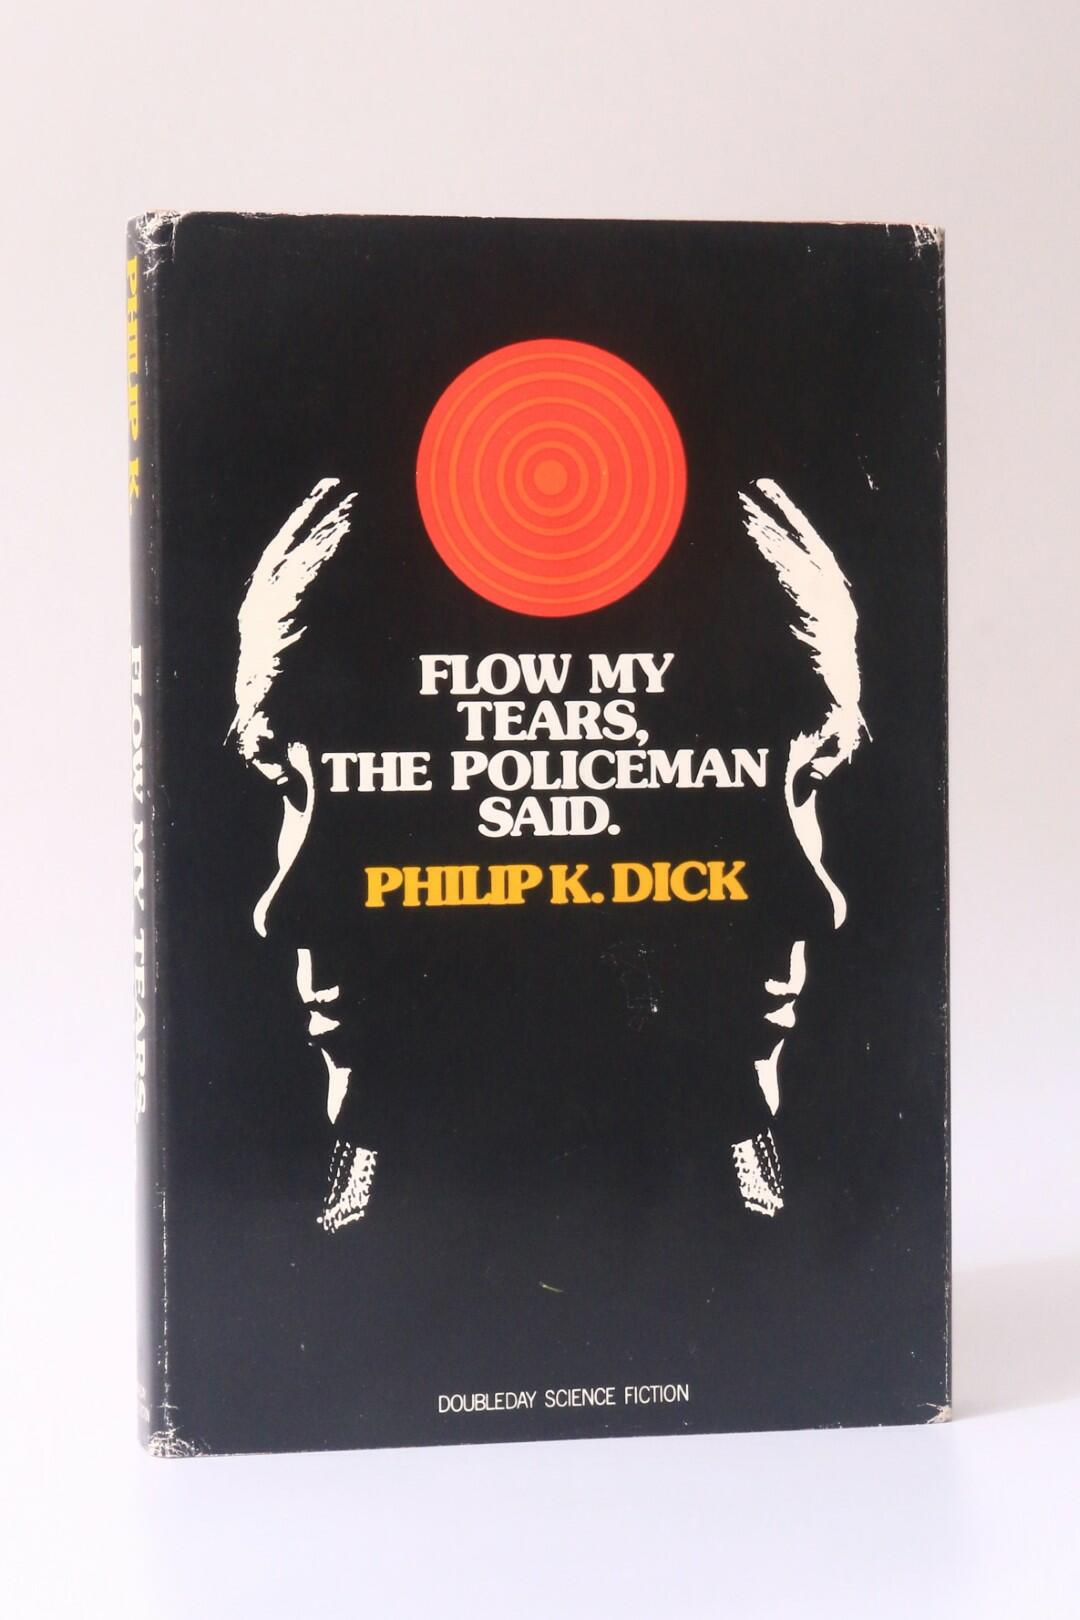 Philip K. Dick - Flow My Tears, The Policeman Said - Doubleday, 1974, First Edition.